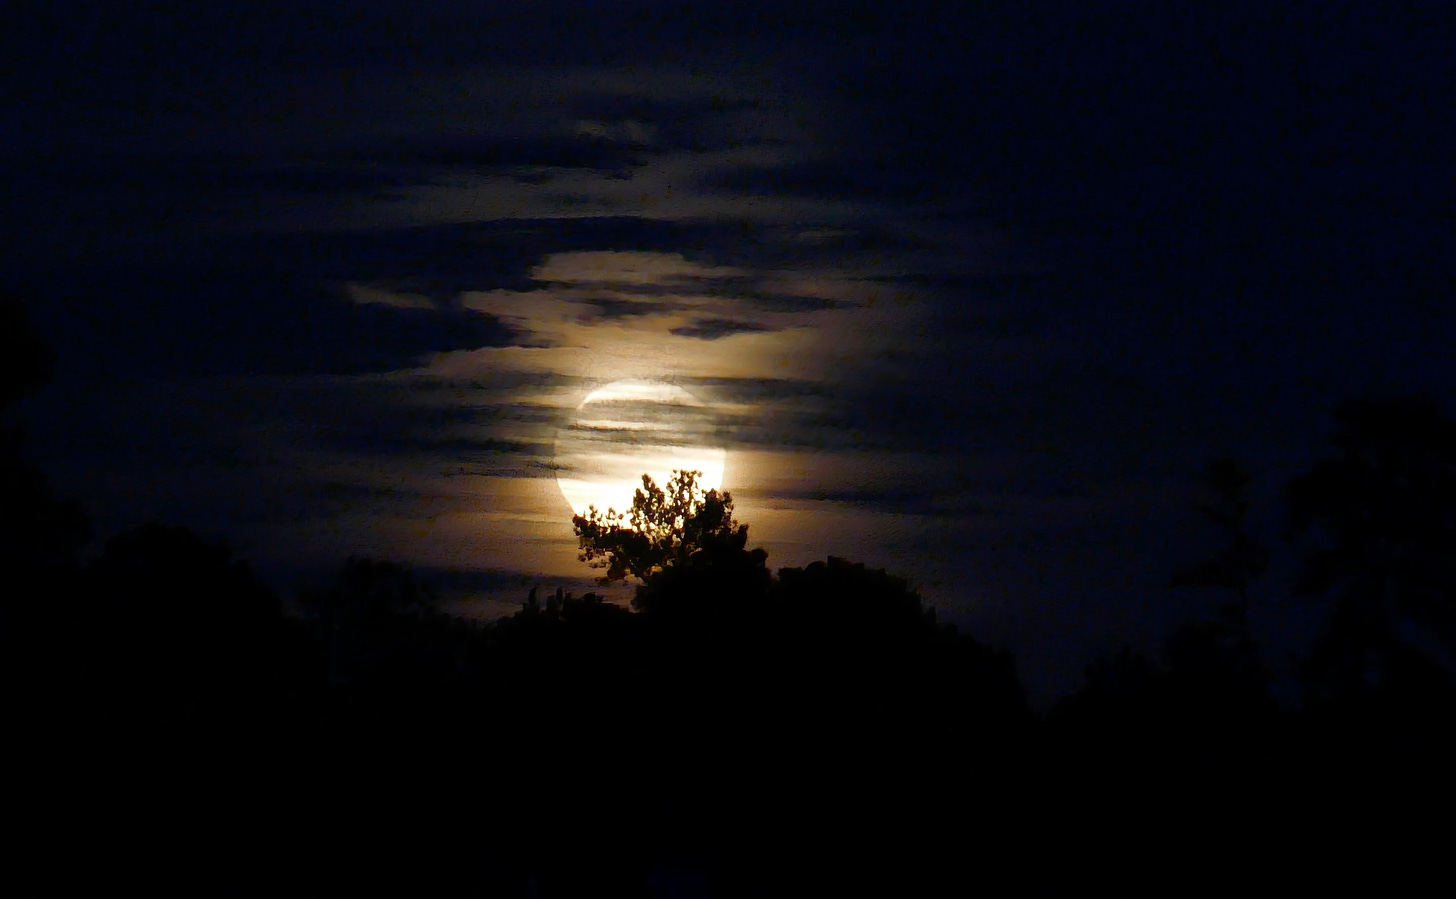 A full moon against the dark night sky with clouds wisping across and the top branches of a tree silhouetting the bottom right corner of the moon